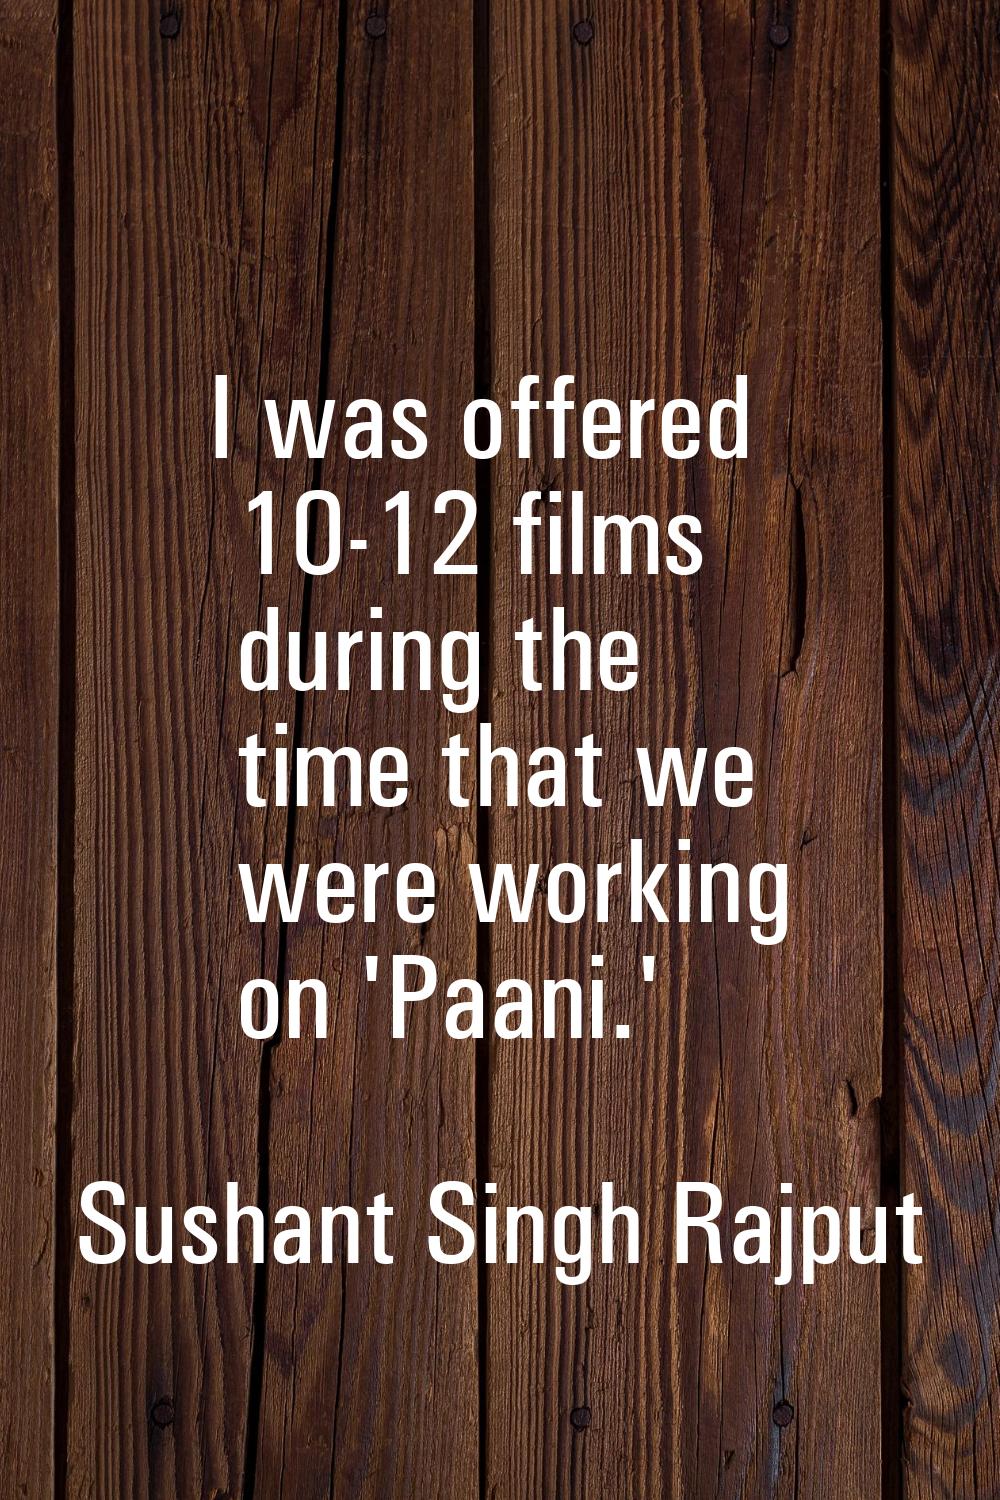 I was offered 10-12 films during the time that we were working on 'Paani.'